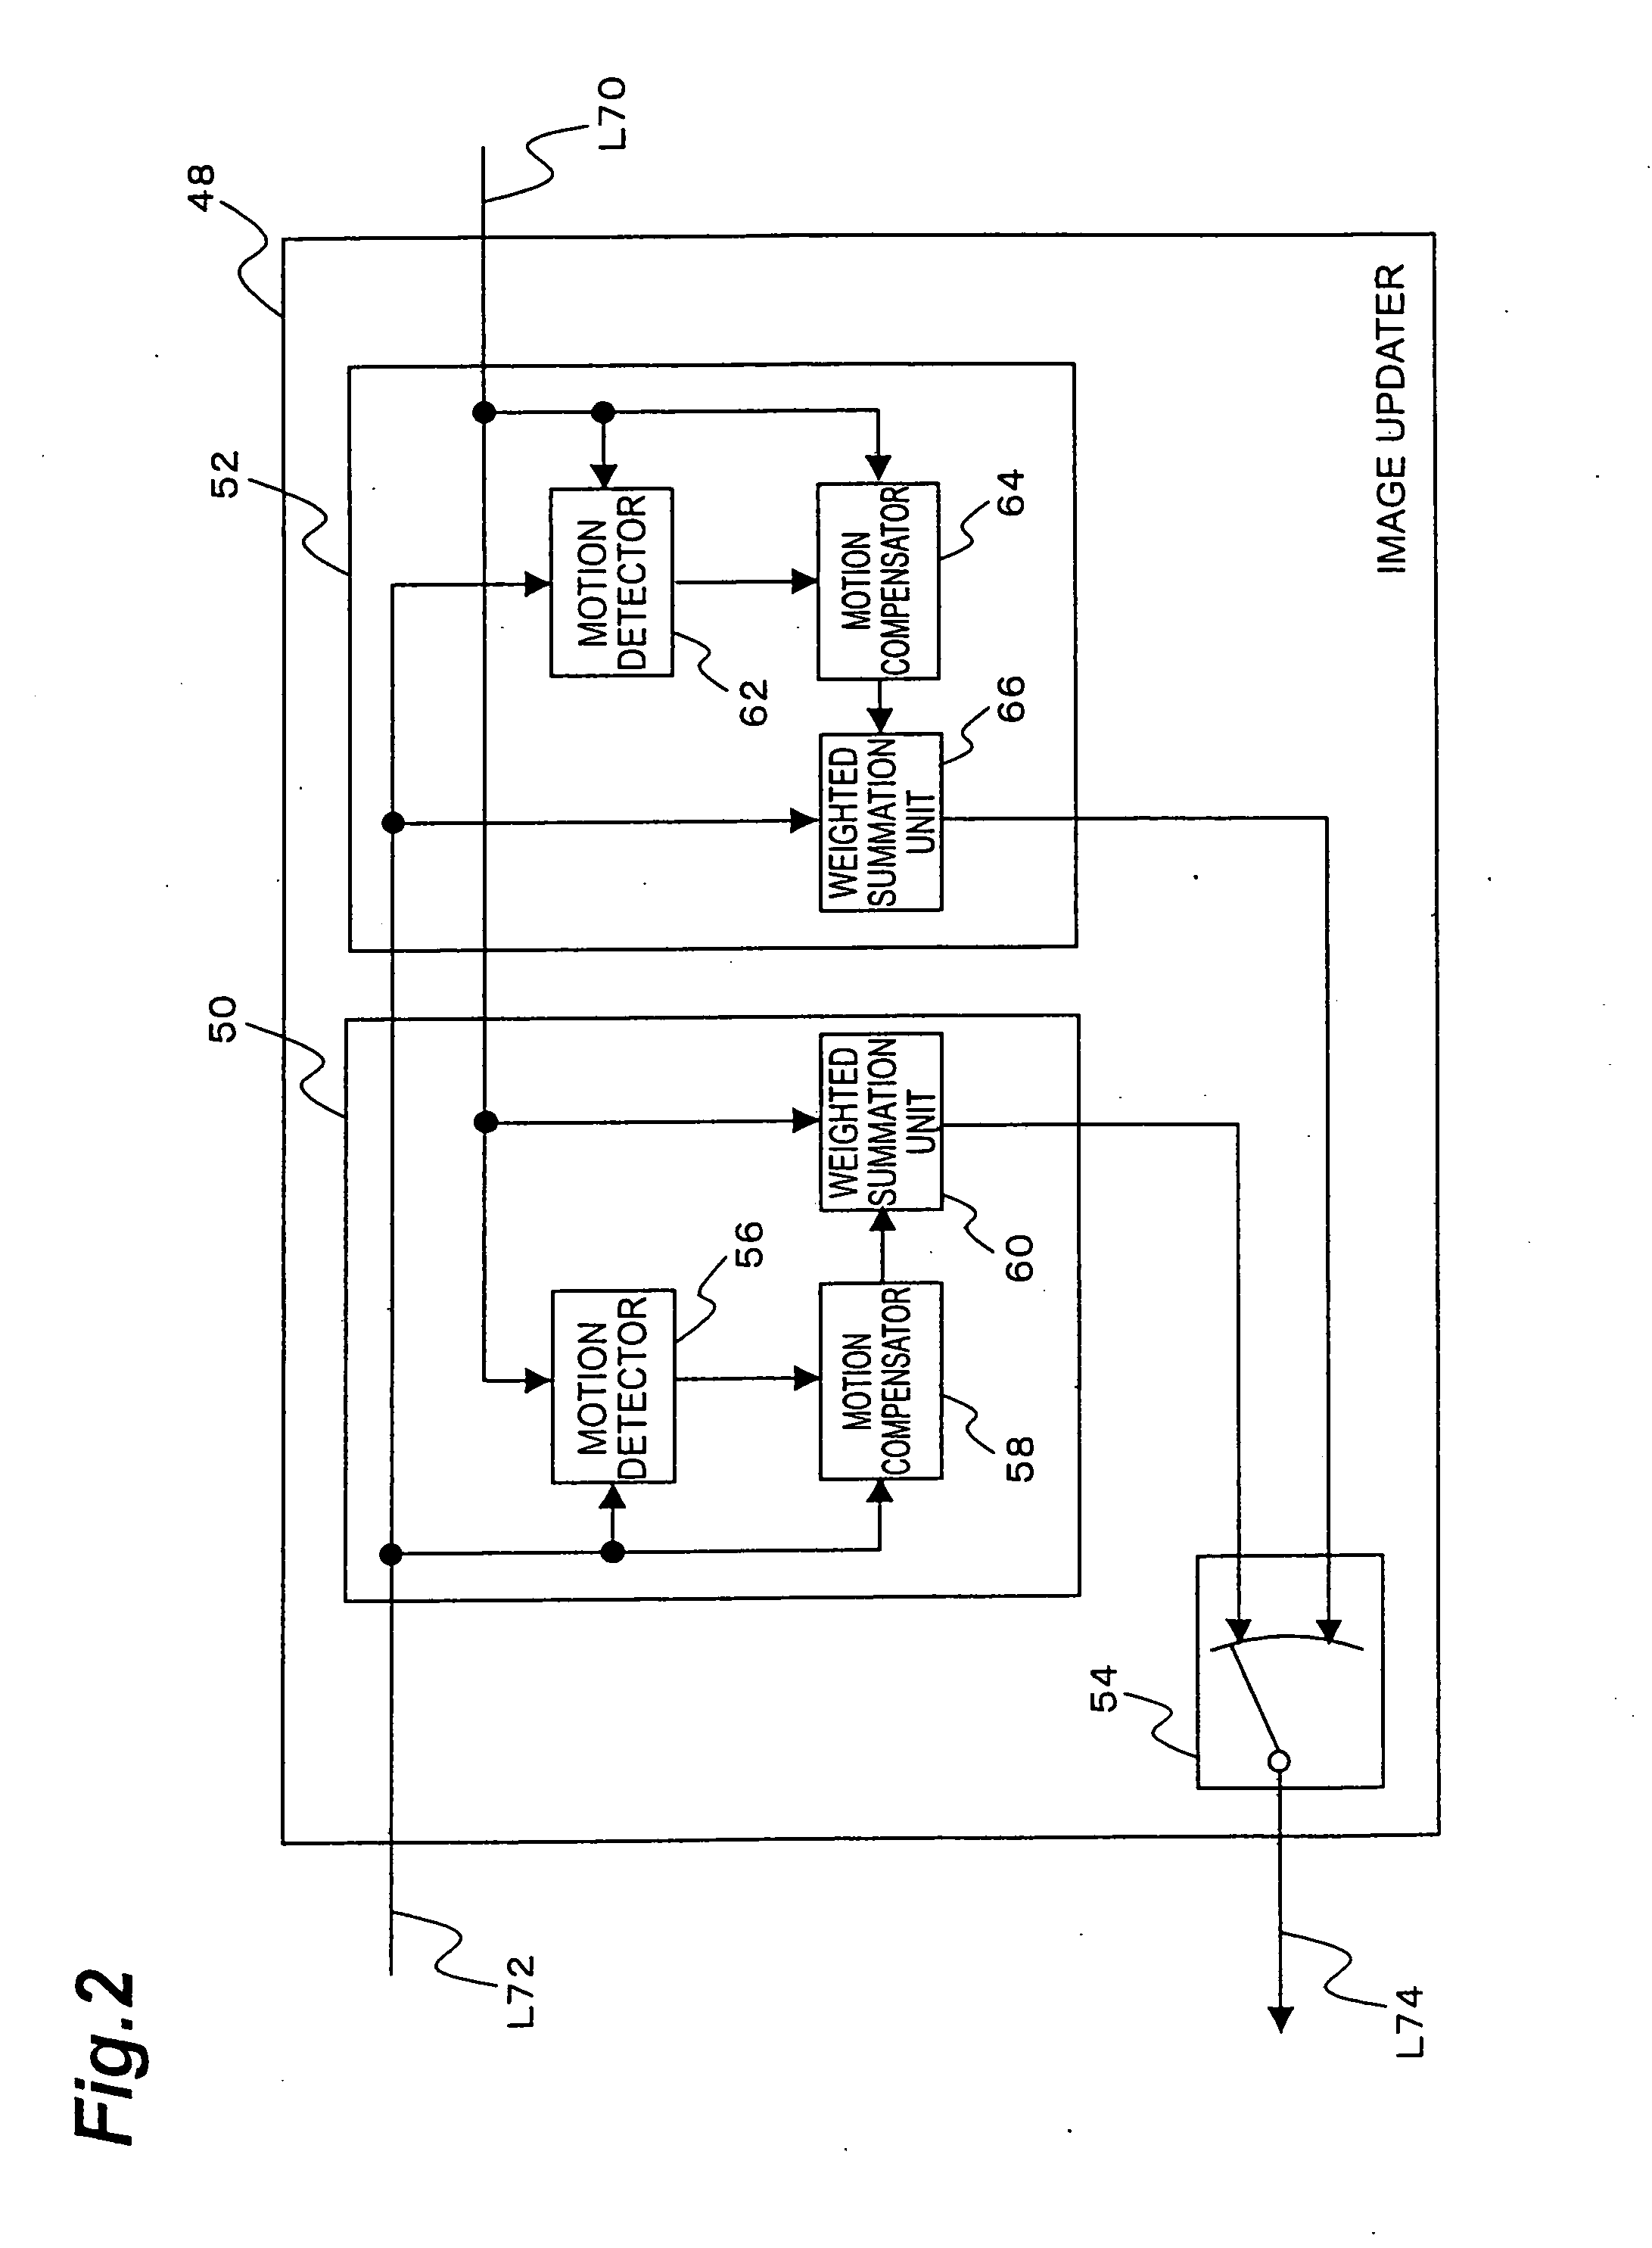 Moving picture encoding apparatus, moving picture encoding method, moving picture encoding program, moving picture decoding apparatus, moving picture decoding method, and moving picture decoding program